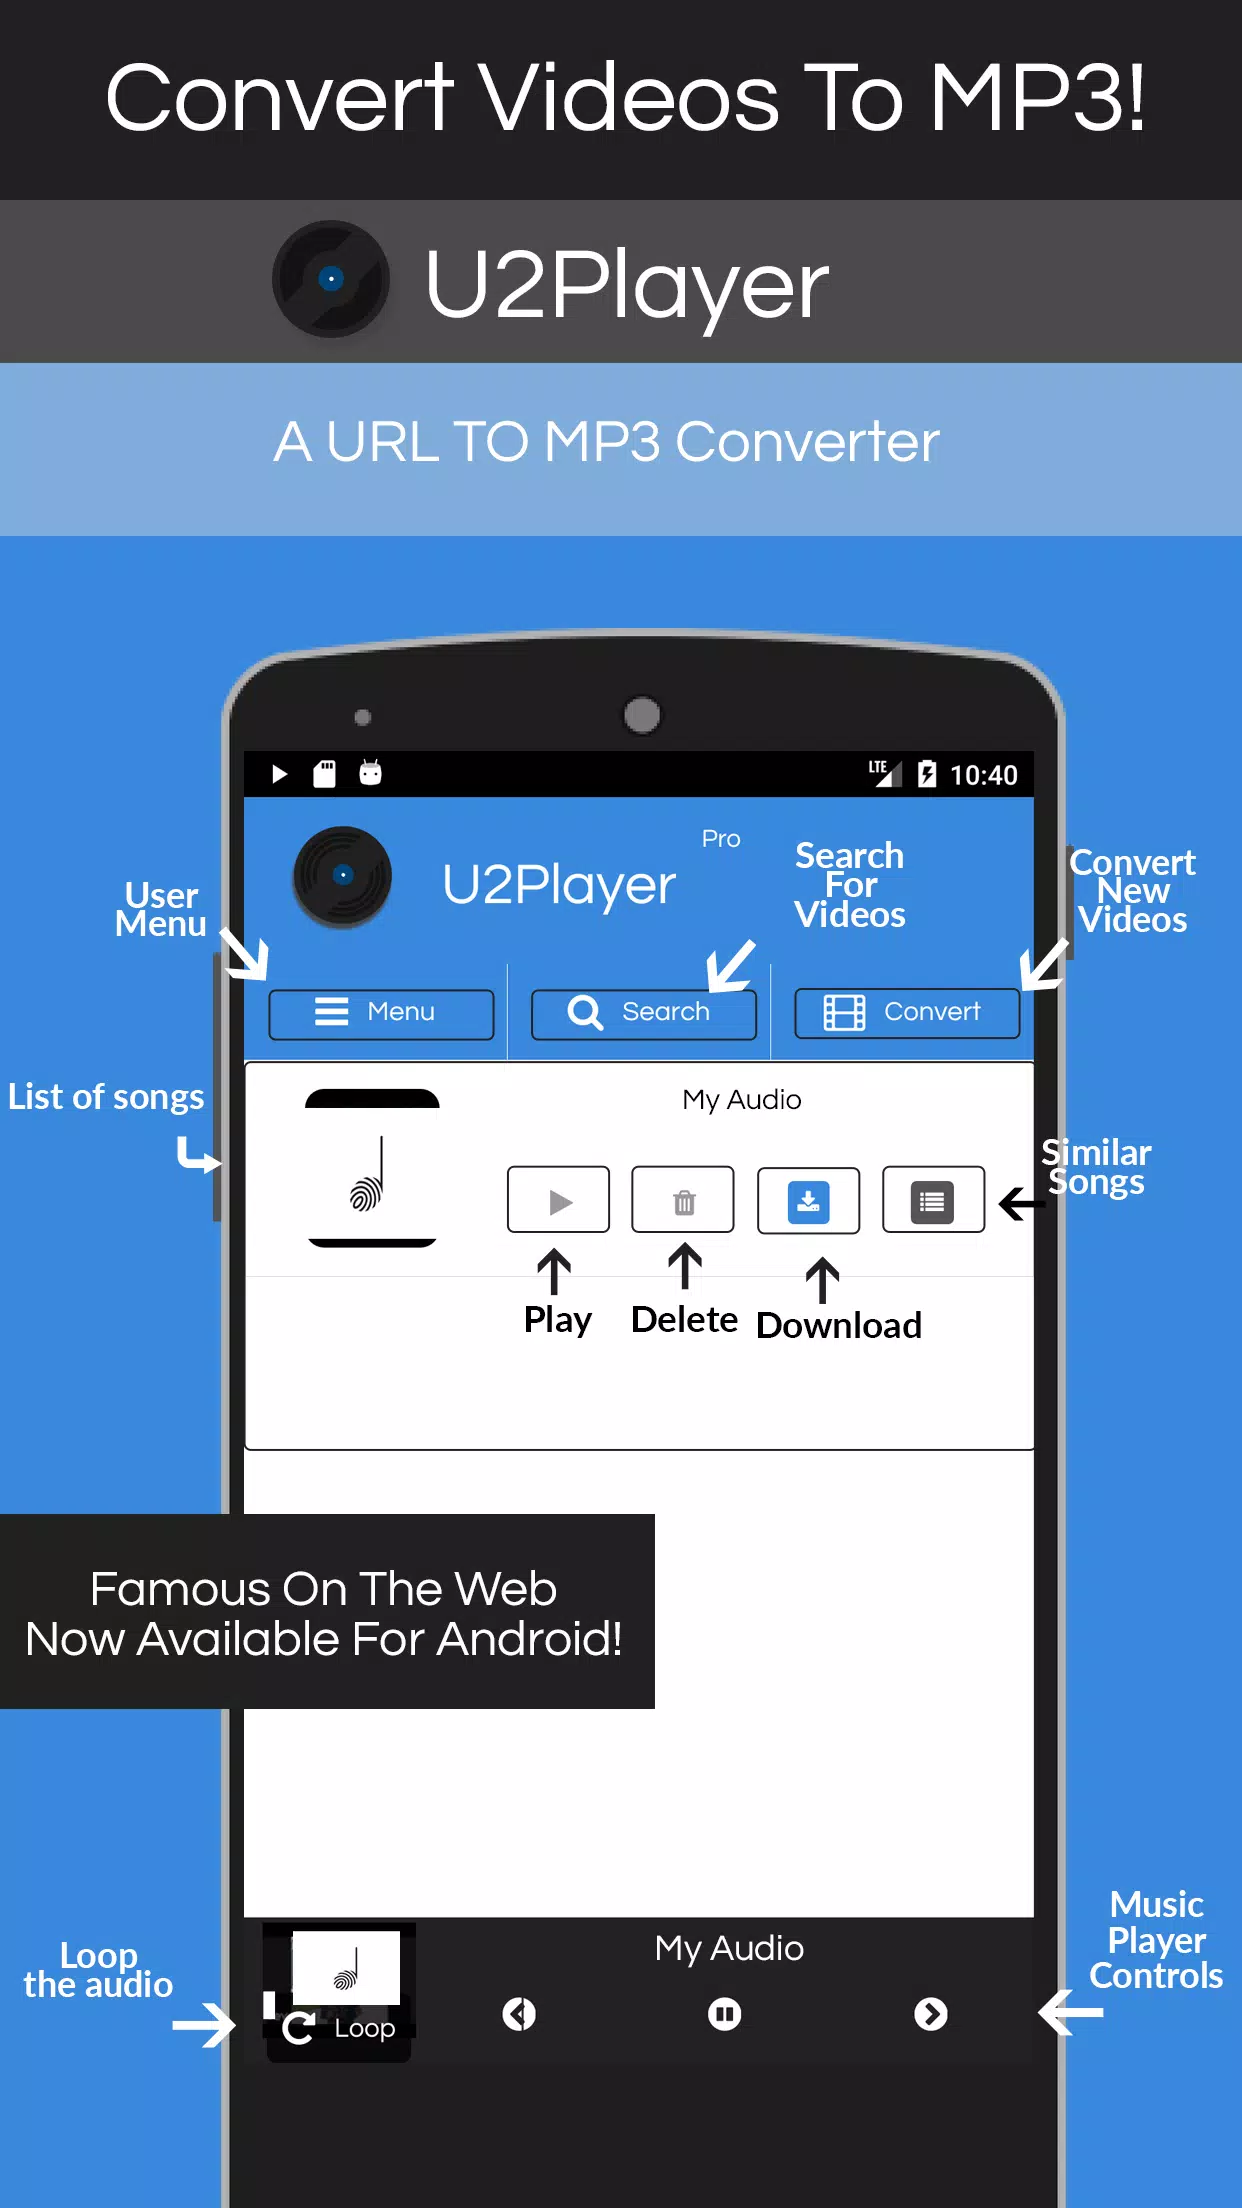 YouT URL Converter, Convert Video To MP3 U2Player for Android - APK Download